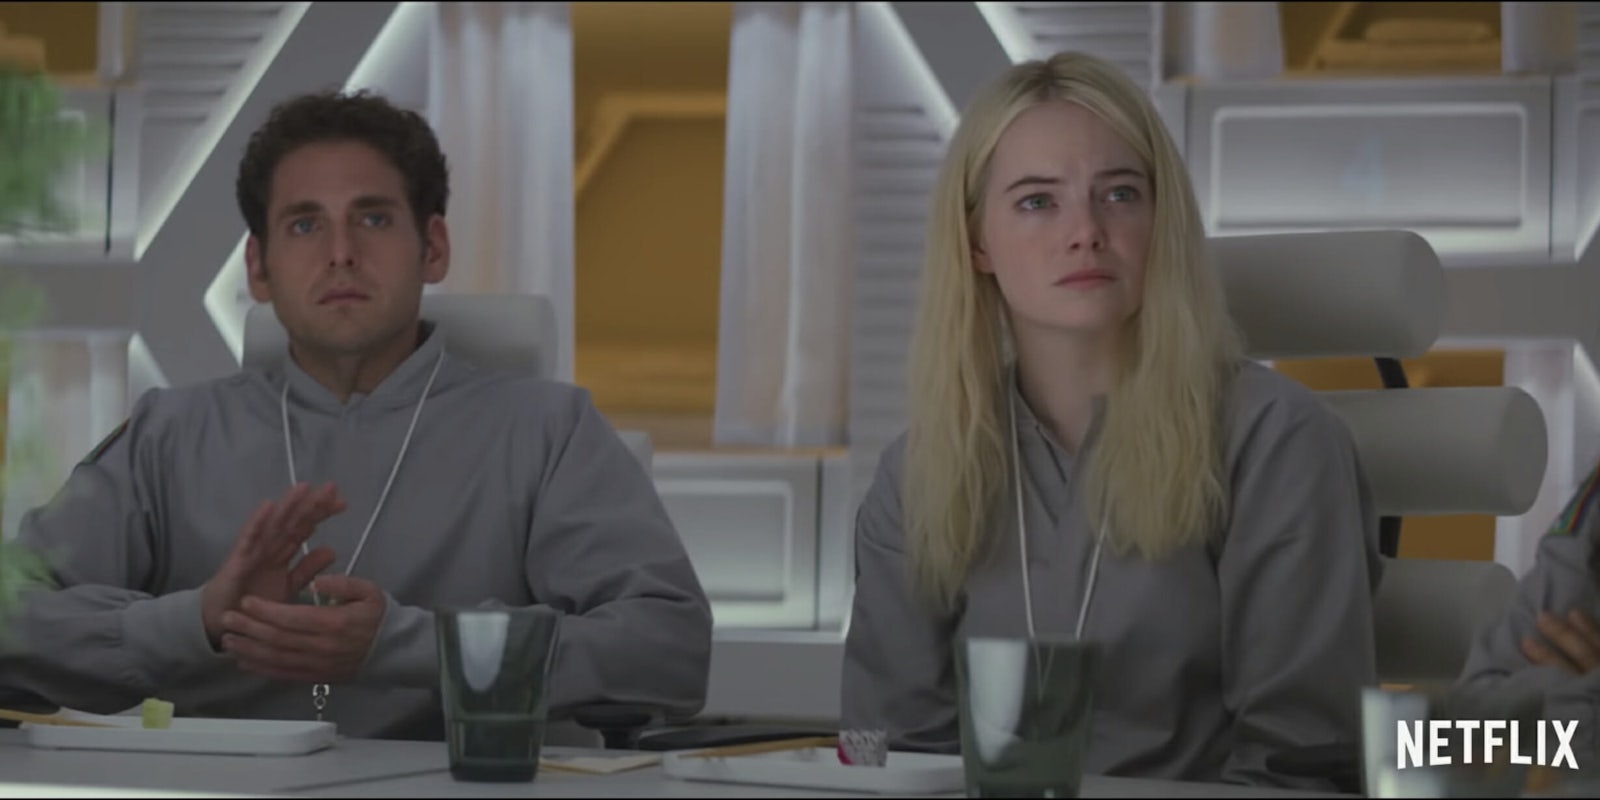 Emma Stone and Jonah Hill star in Netflix's coming series 'Maniac.'